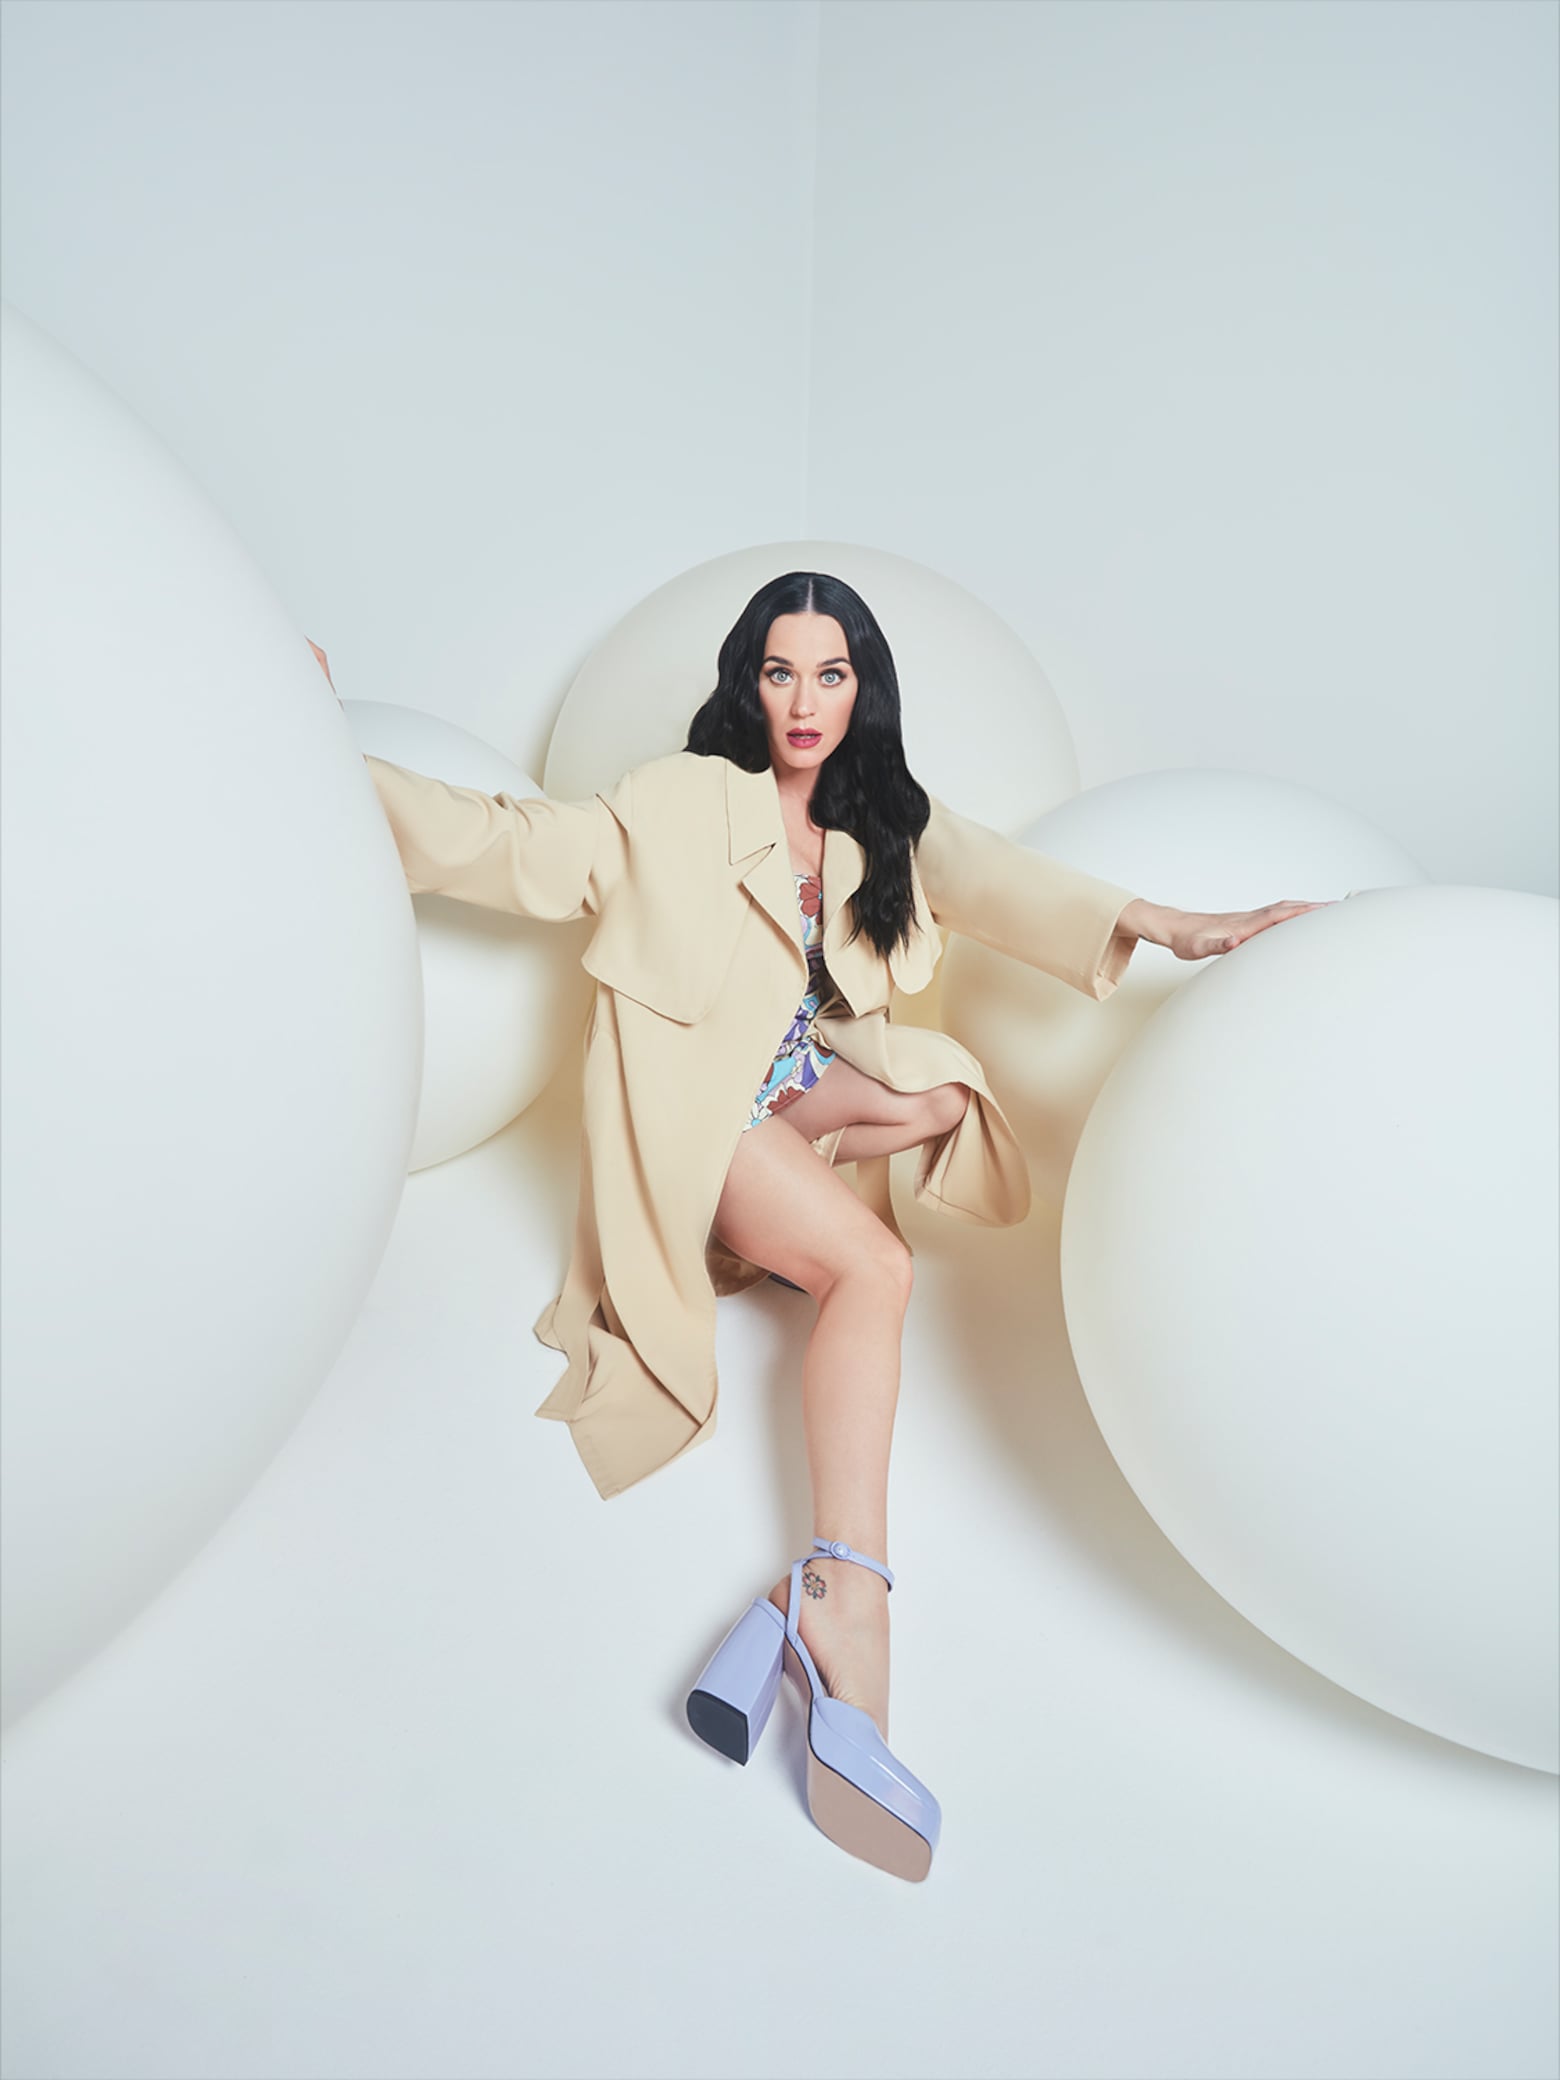 Entdecke die neue Kollektion Katy Perry co-created by ABOUT YOU